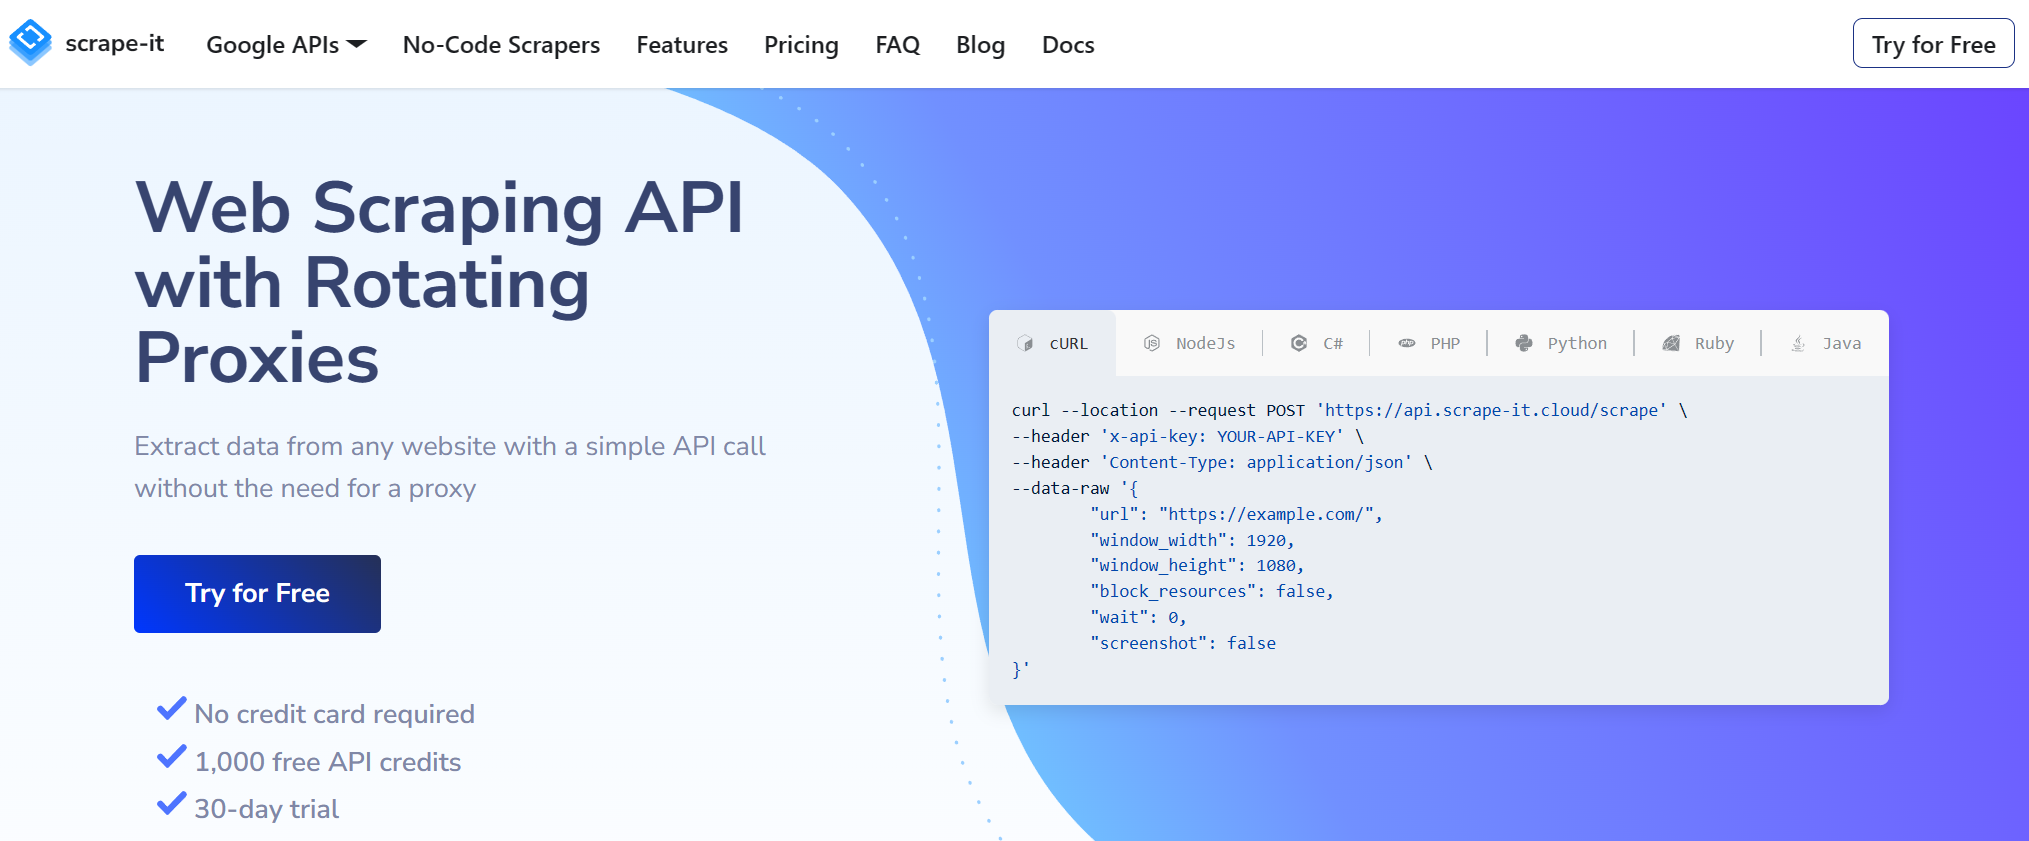 home page of the scrape-it.cloud api